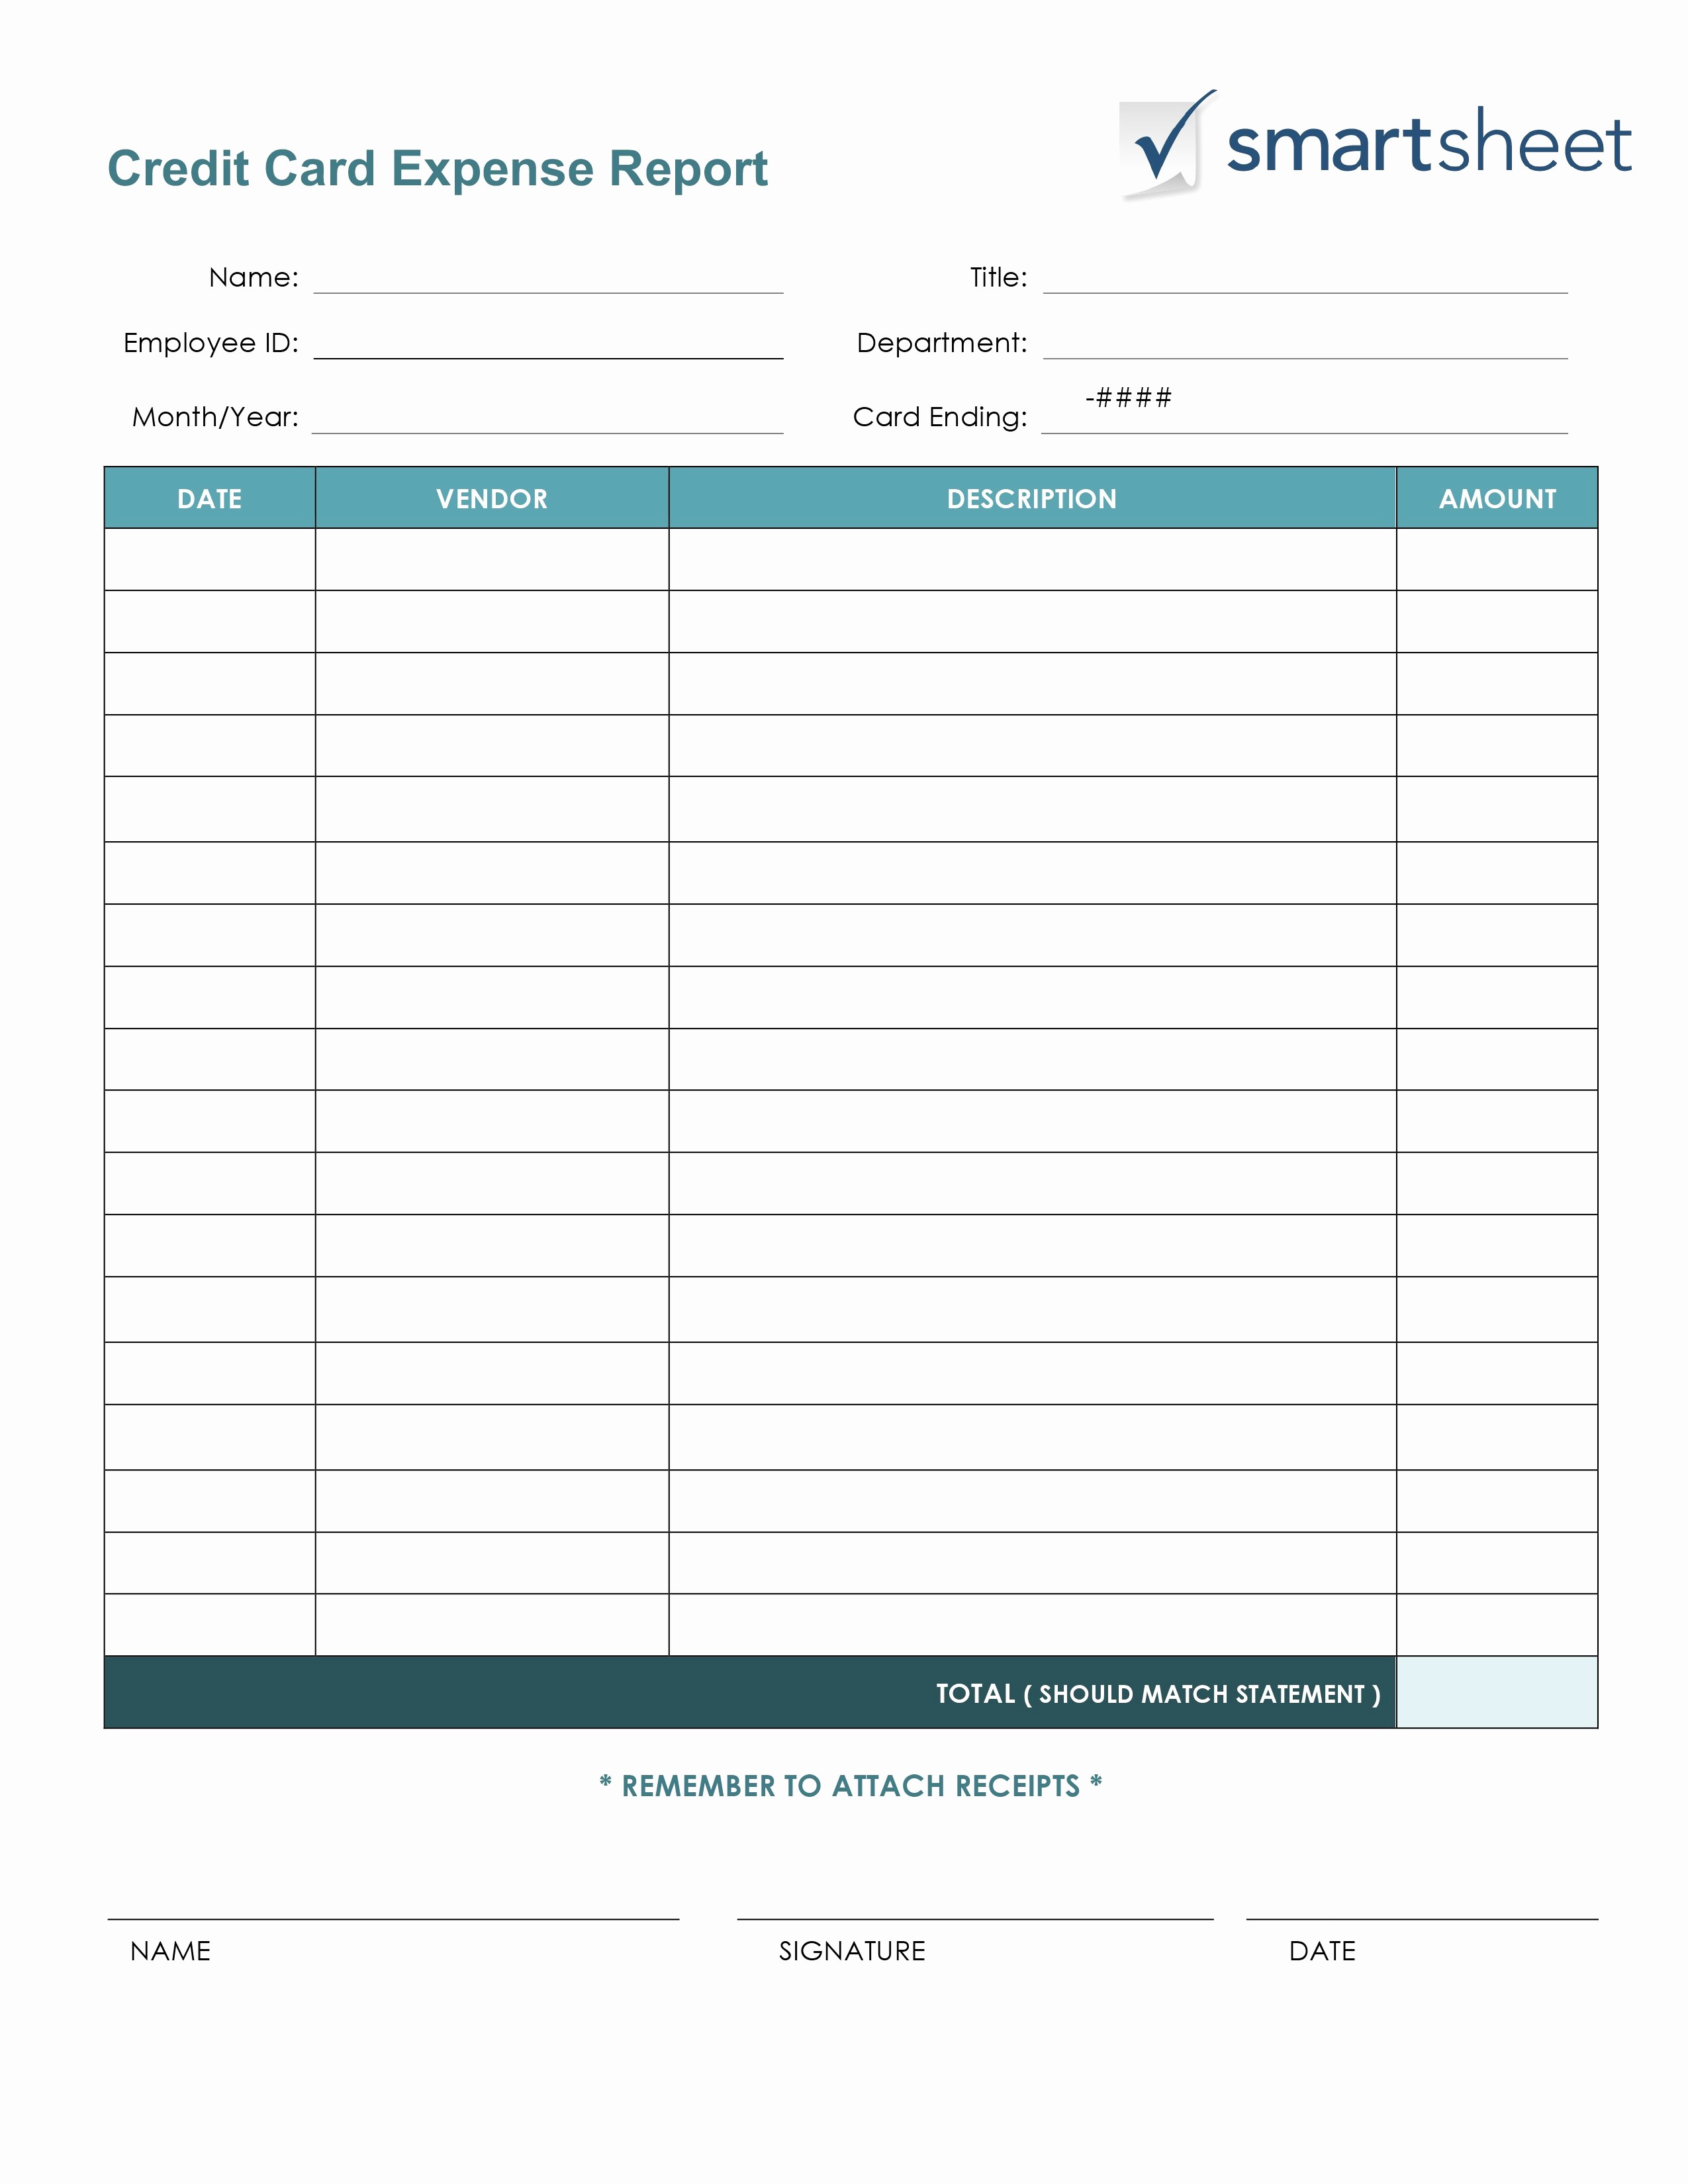 Income and Expense Report Template Unique Free Expense Report Templates Smartsheet